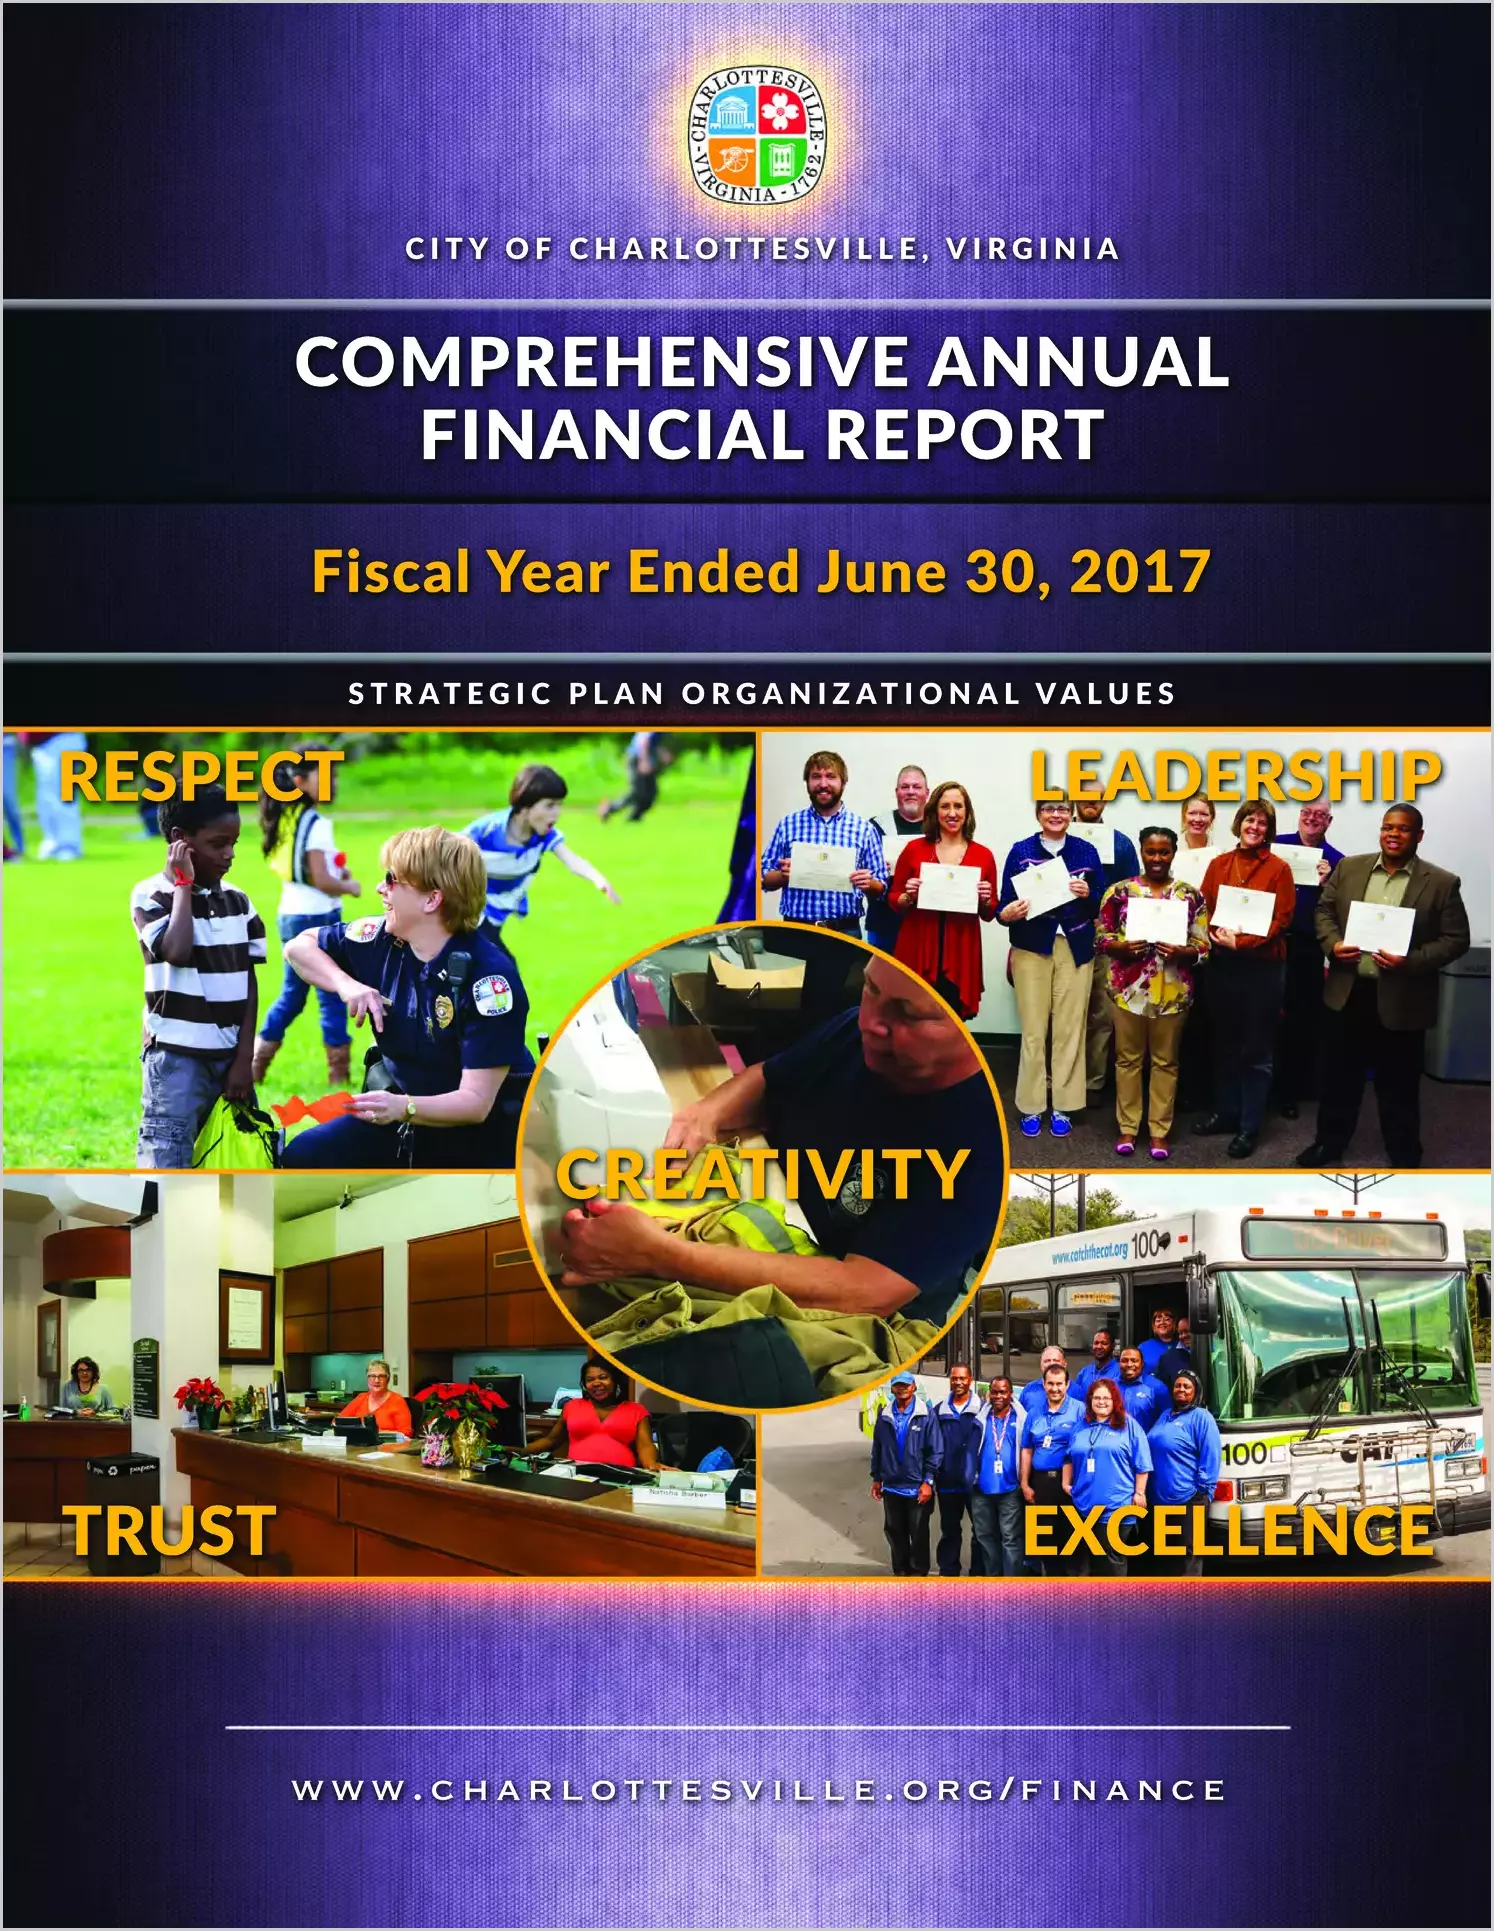 2017 Annual Financial Report for City of Charlottesville